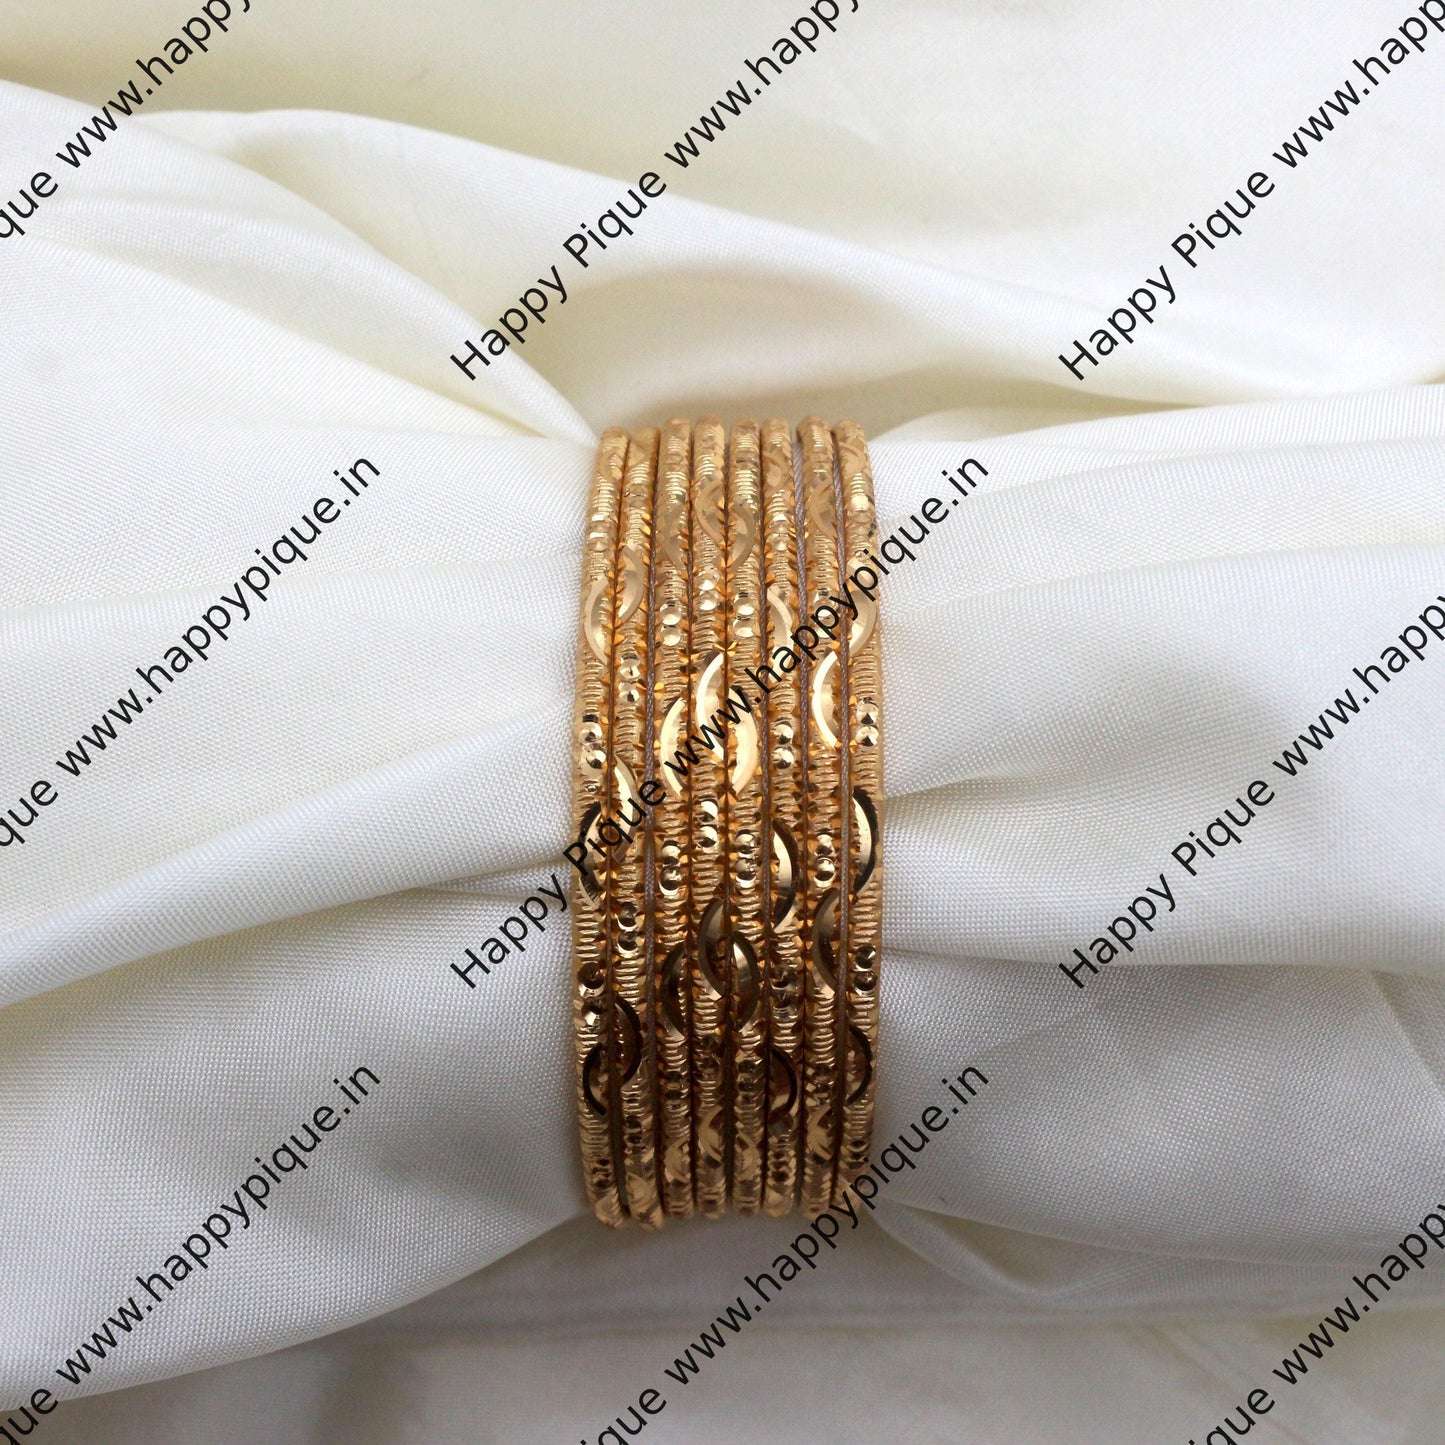 Real Gold Tone Set of 8 Bangles - SS021 - Daily Wear/Office Wear/Function Wear Bangles